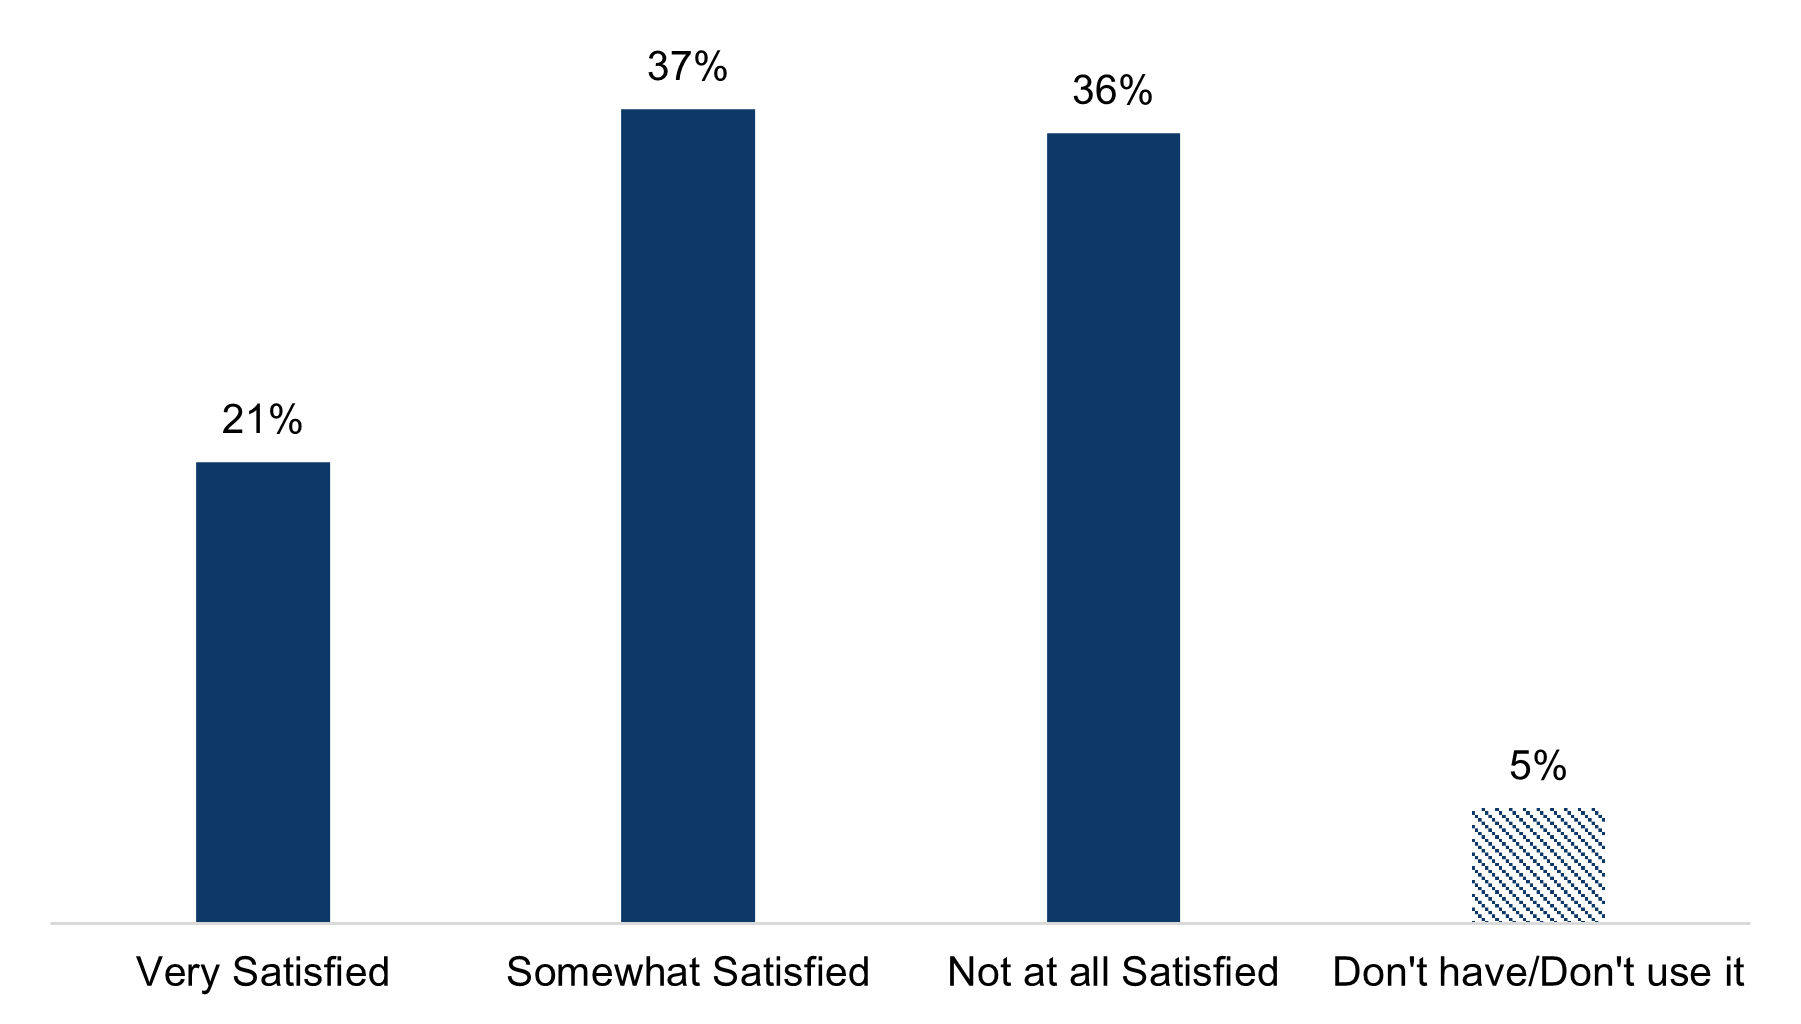 This figure contains a vertical bar chart displaying the percentage of physicians that report various levels of satisfaction with their electronic access to immunization information in their EHR and/or portal outside the EHR. The y-axis represents a range of percentages from 0% to 100%, and the x-axis shows the following categories of satisfaction: “Very Satisfied”, “Somewhat Satisfied”, “Not at all Satisfied”, and “Don’t have/Don’t use it.” The bars show that 21% of physicians reported being “Very Satisfied”, 37% were “Somewhat Satisfied”, 36% were “Not at all Satisfied”, and 5% indicated that they “Don’t have/Don’t use it." 